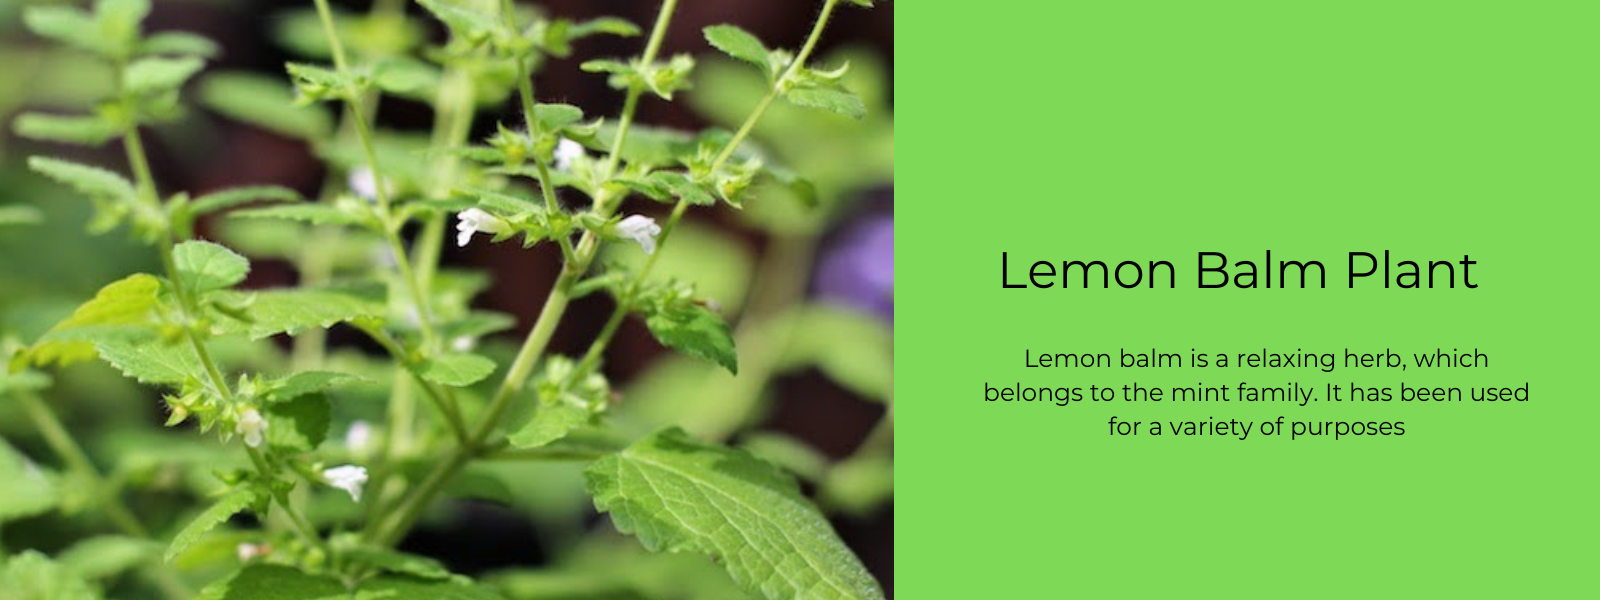 Lemon Balm Plant - Health Benefits, Uses and Important Facts